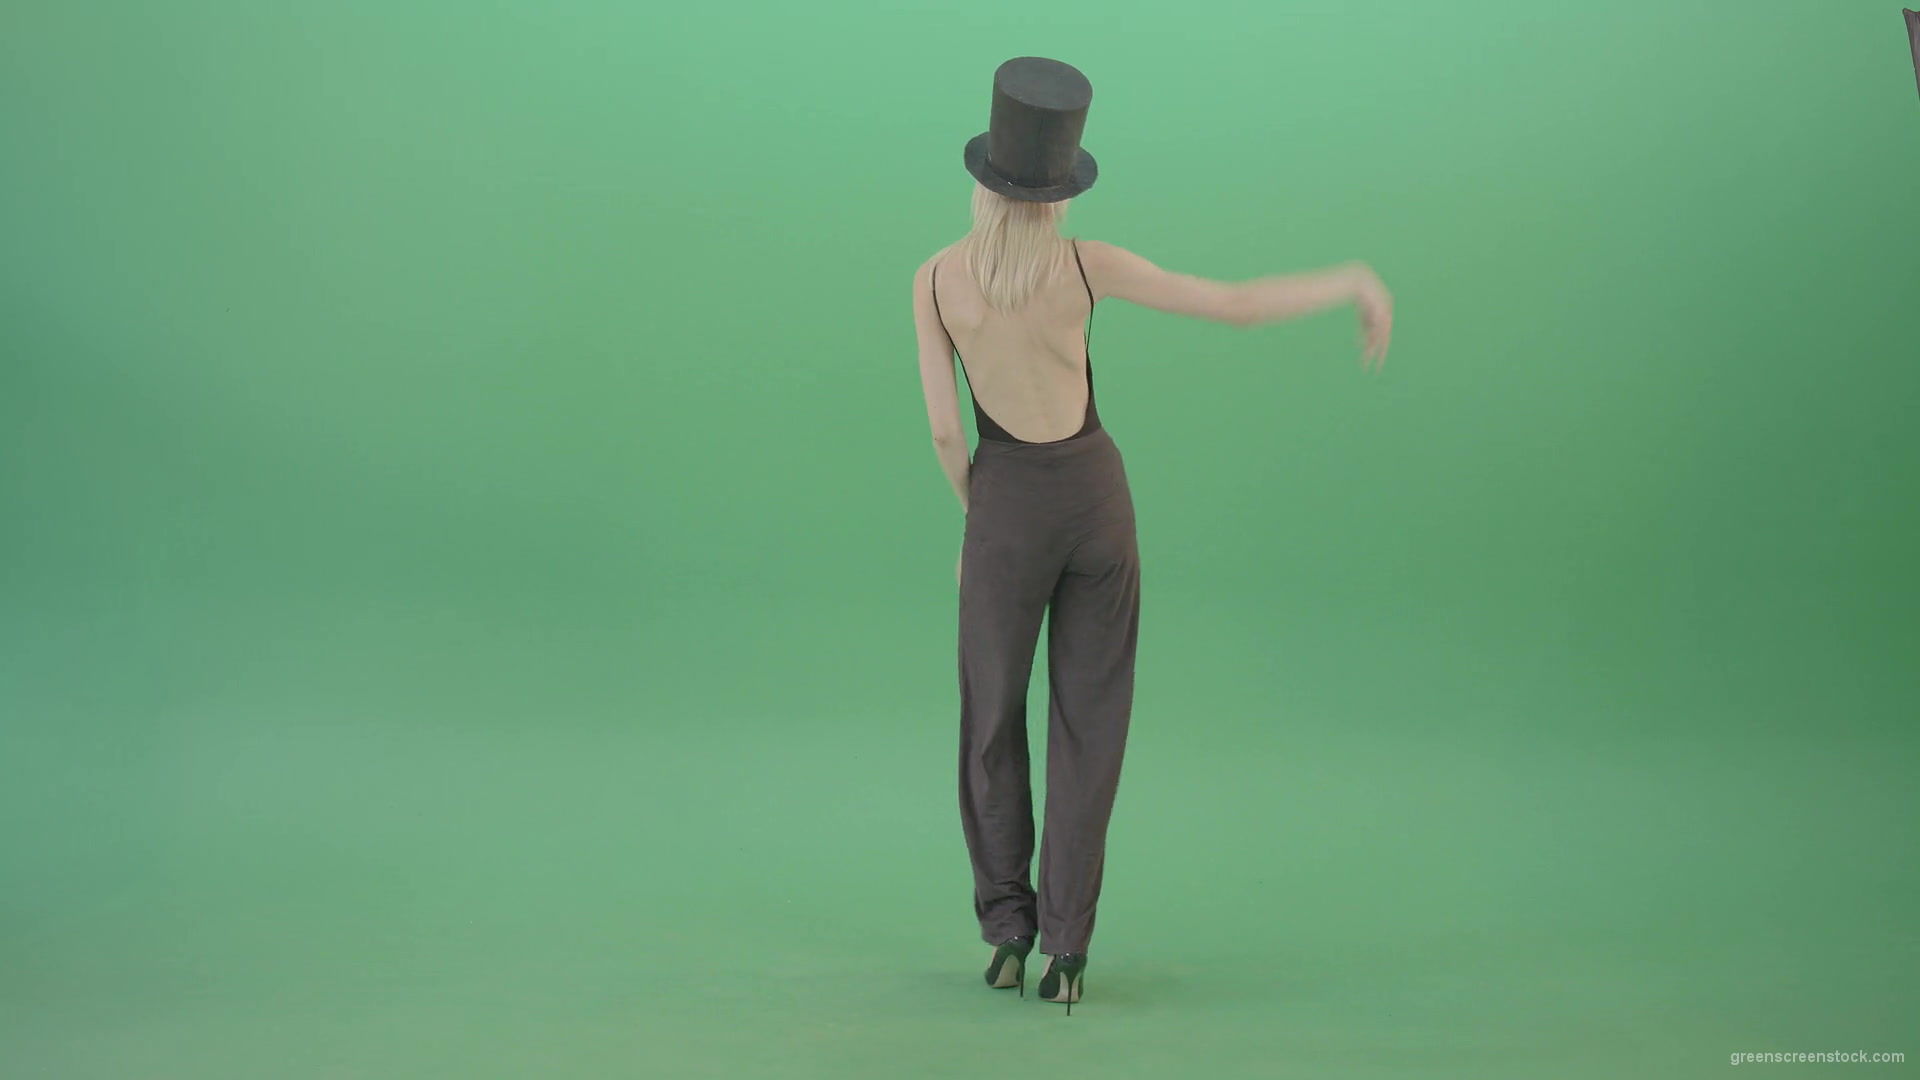 Magic-elegant-dancing-girl-slowly-moving-on-green-background-4K-Video-Footage-1920_006 Green Screen Stock